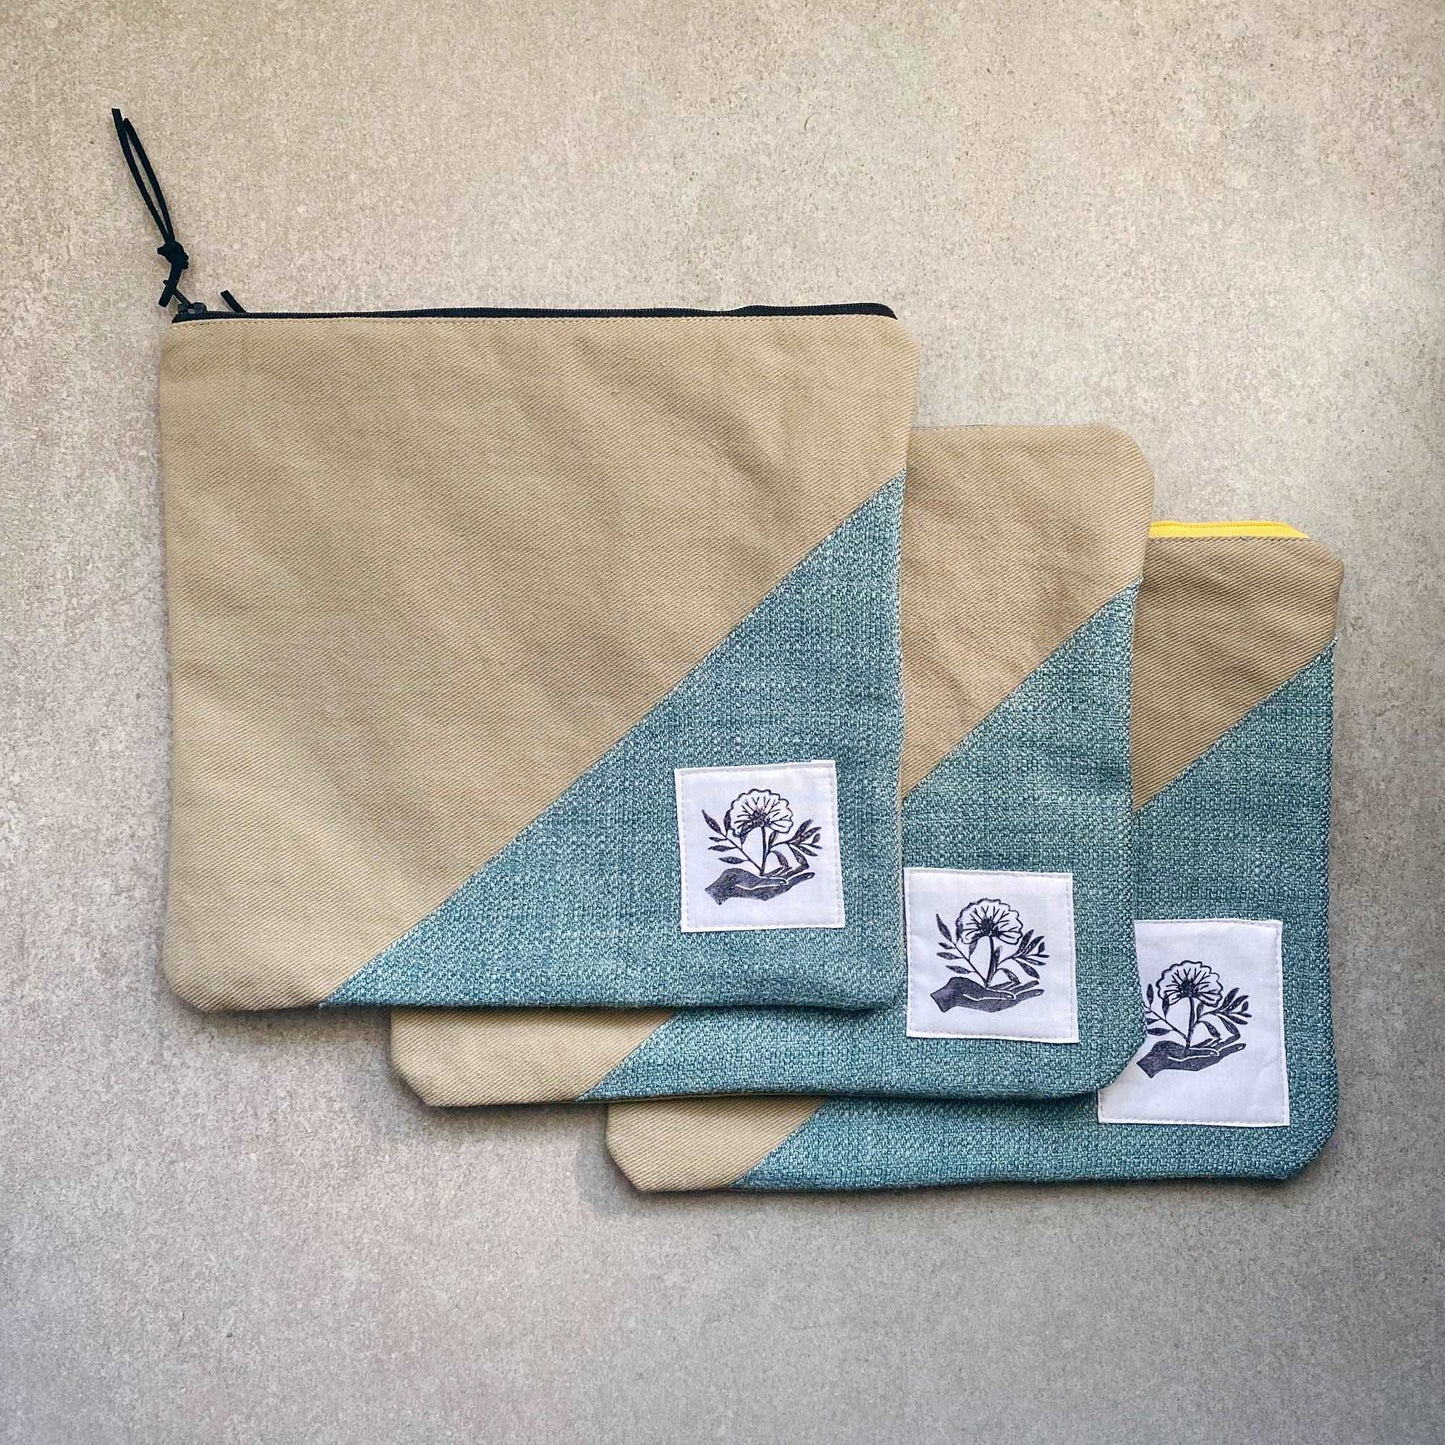 This is a photo of three large canvas zipper pouches that have textured teal fabric panels on them. They are laying on a light gray background.